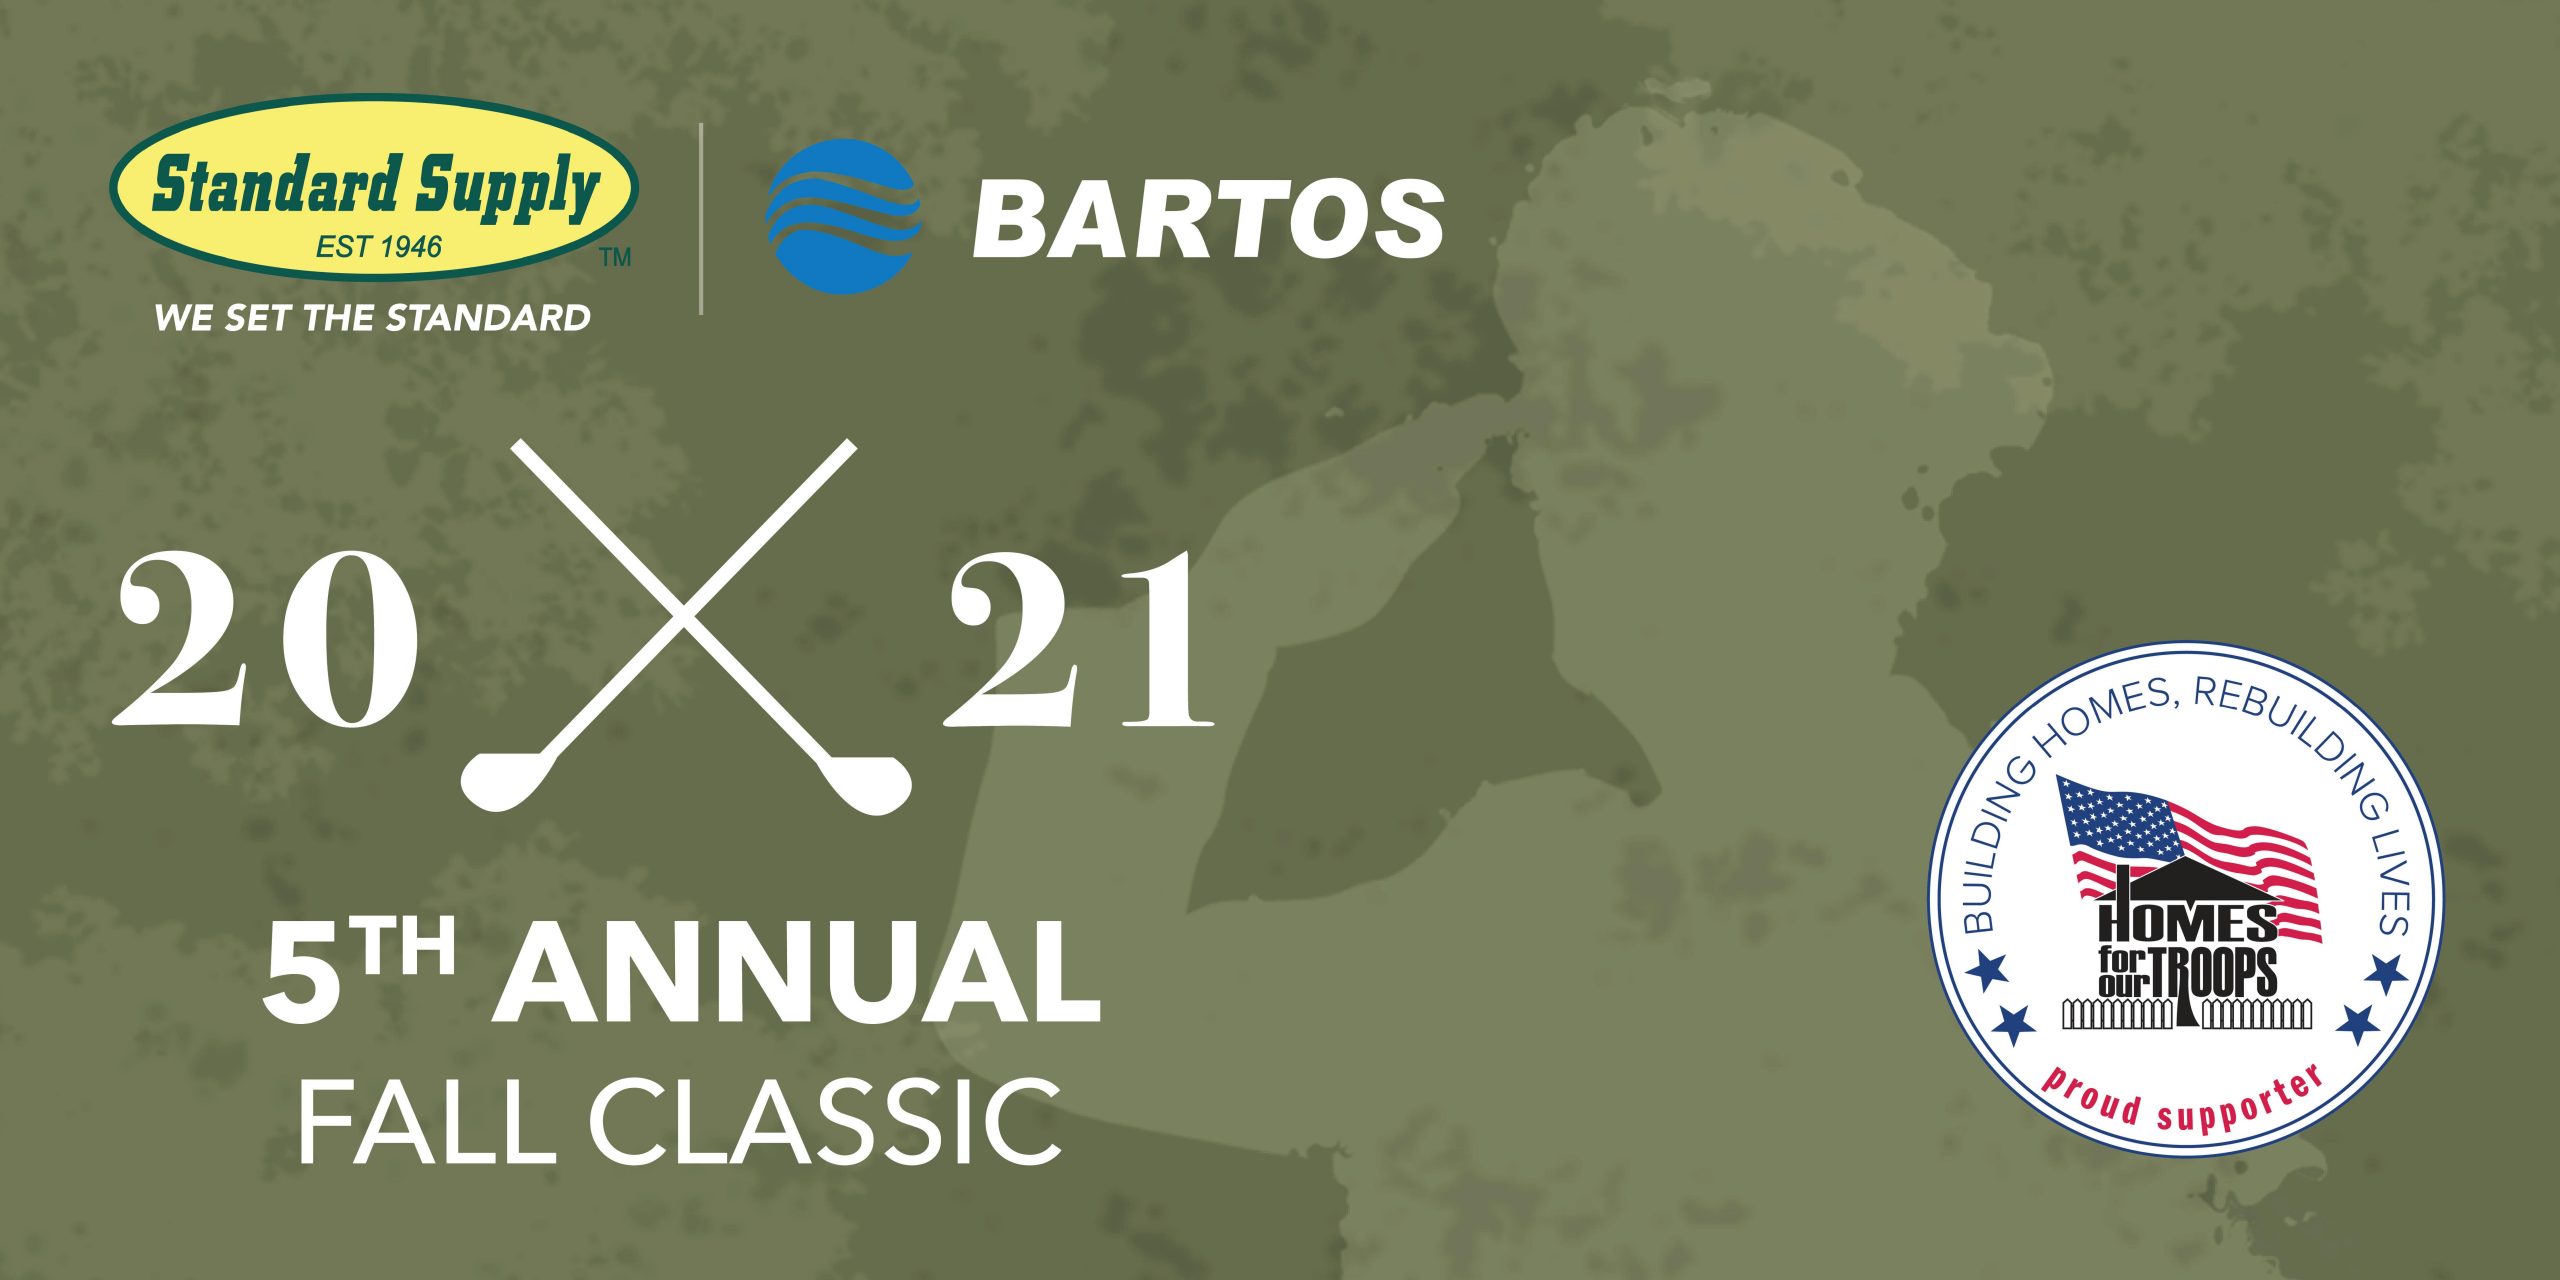 Standard Supply & Bartos - 2021 Homes for Our Troops Golf Tournament